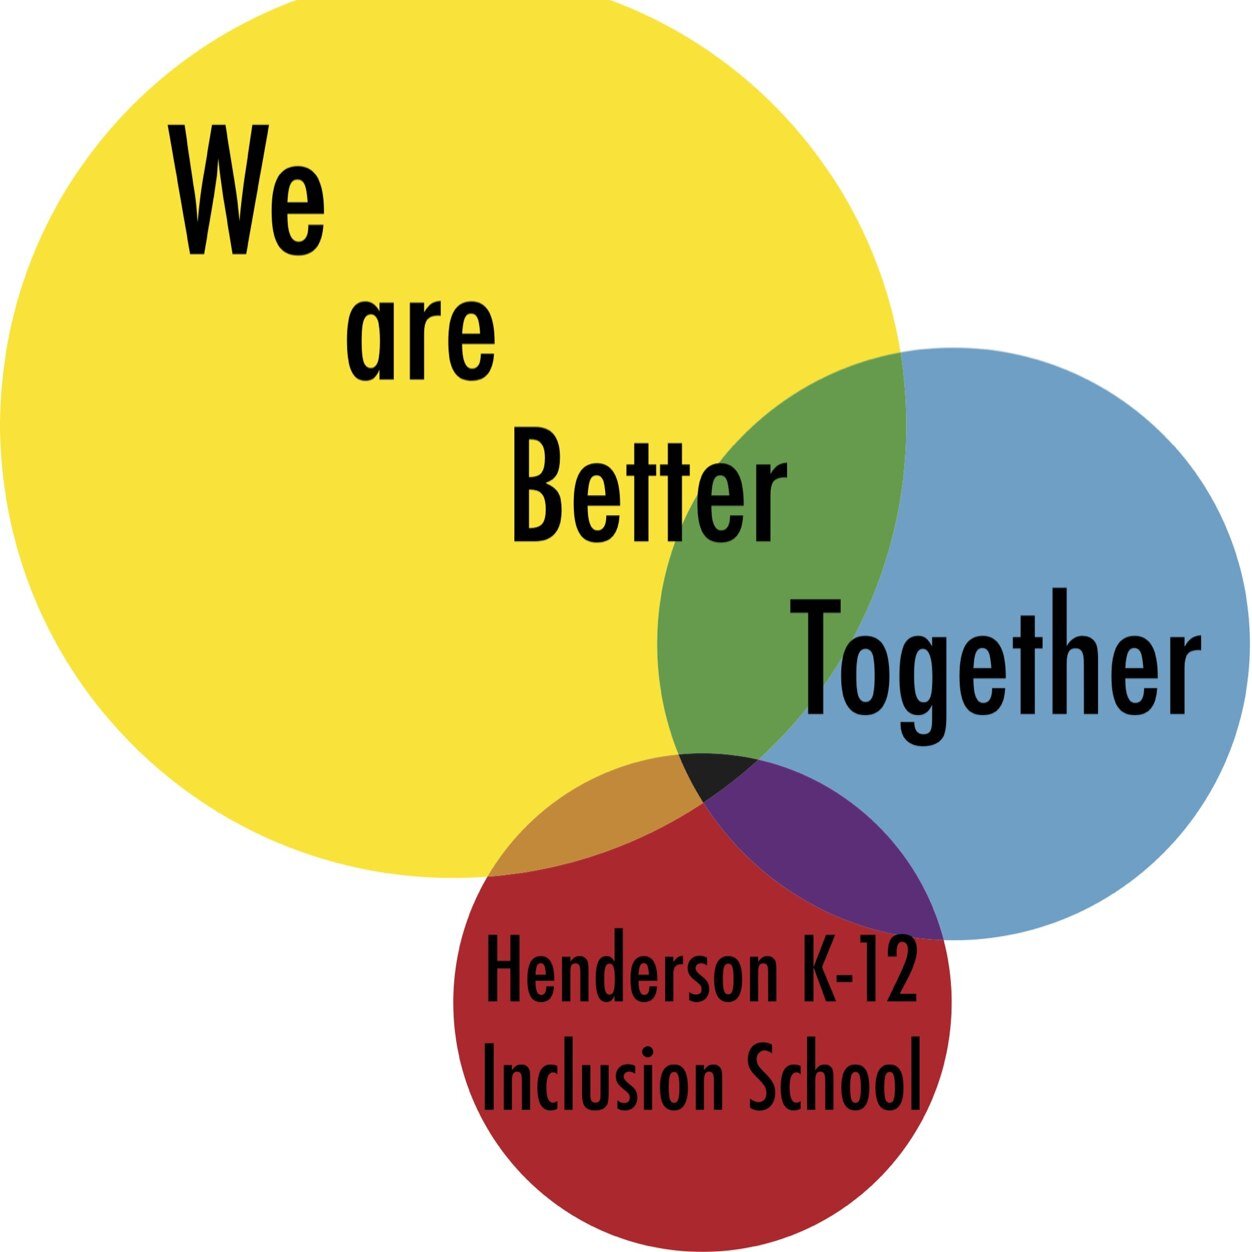 Henderson K12 Inclusion School Friends/ 25 years of inclusion & growing/ 
We are Better Together